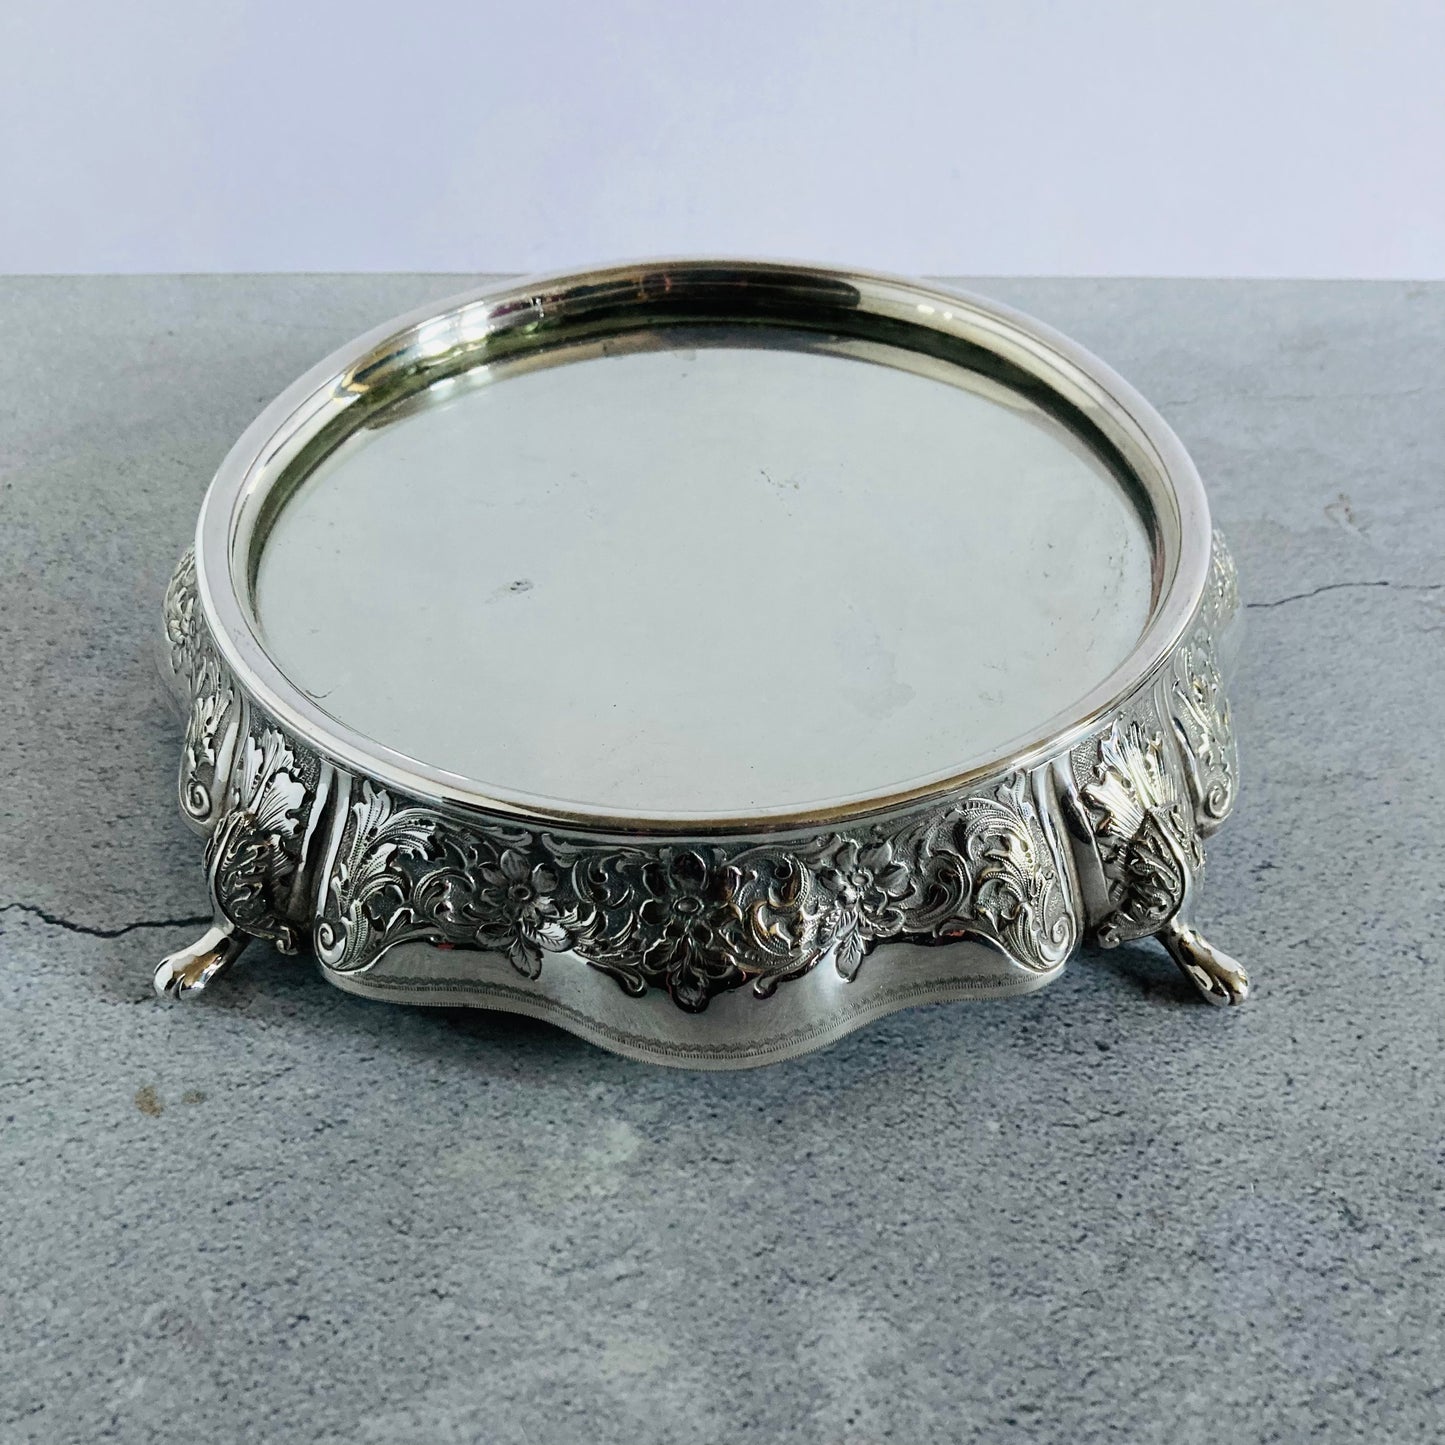 Antique Silver Plated Mirror Tray Plateau Display Piece